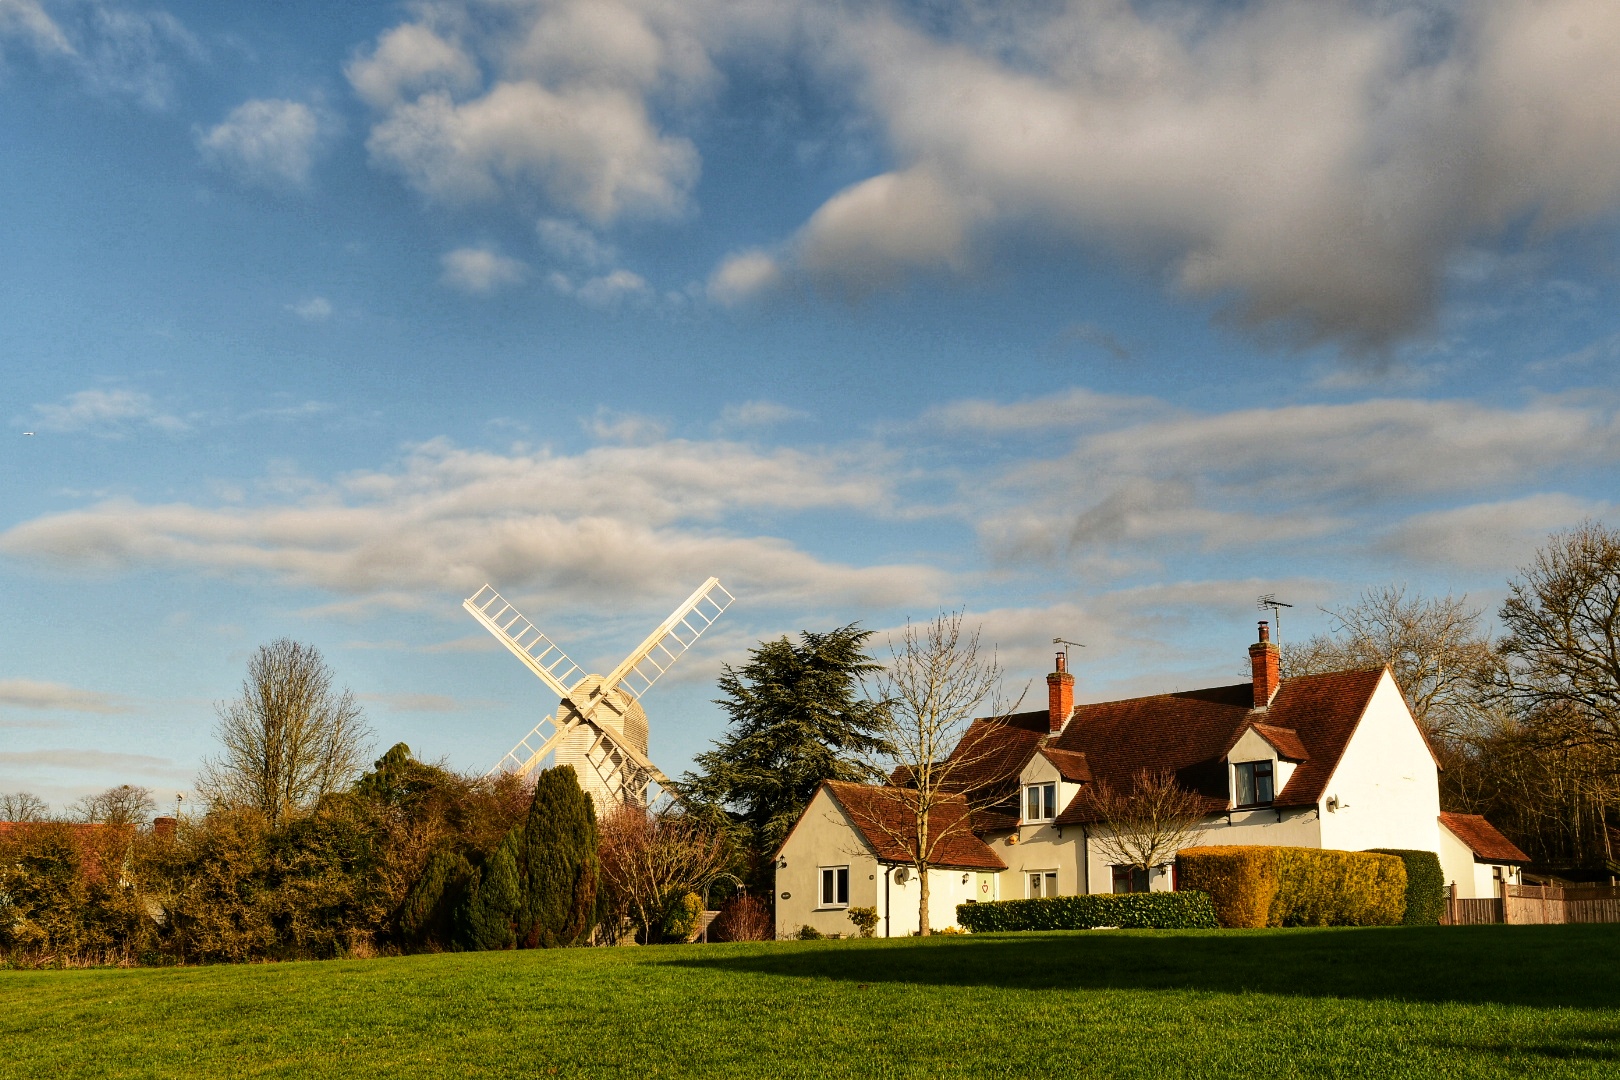 A picture of the braintree district with a windmill and a row of houses